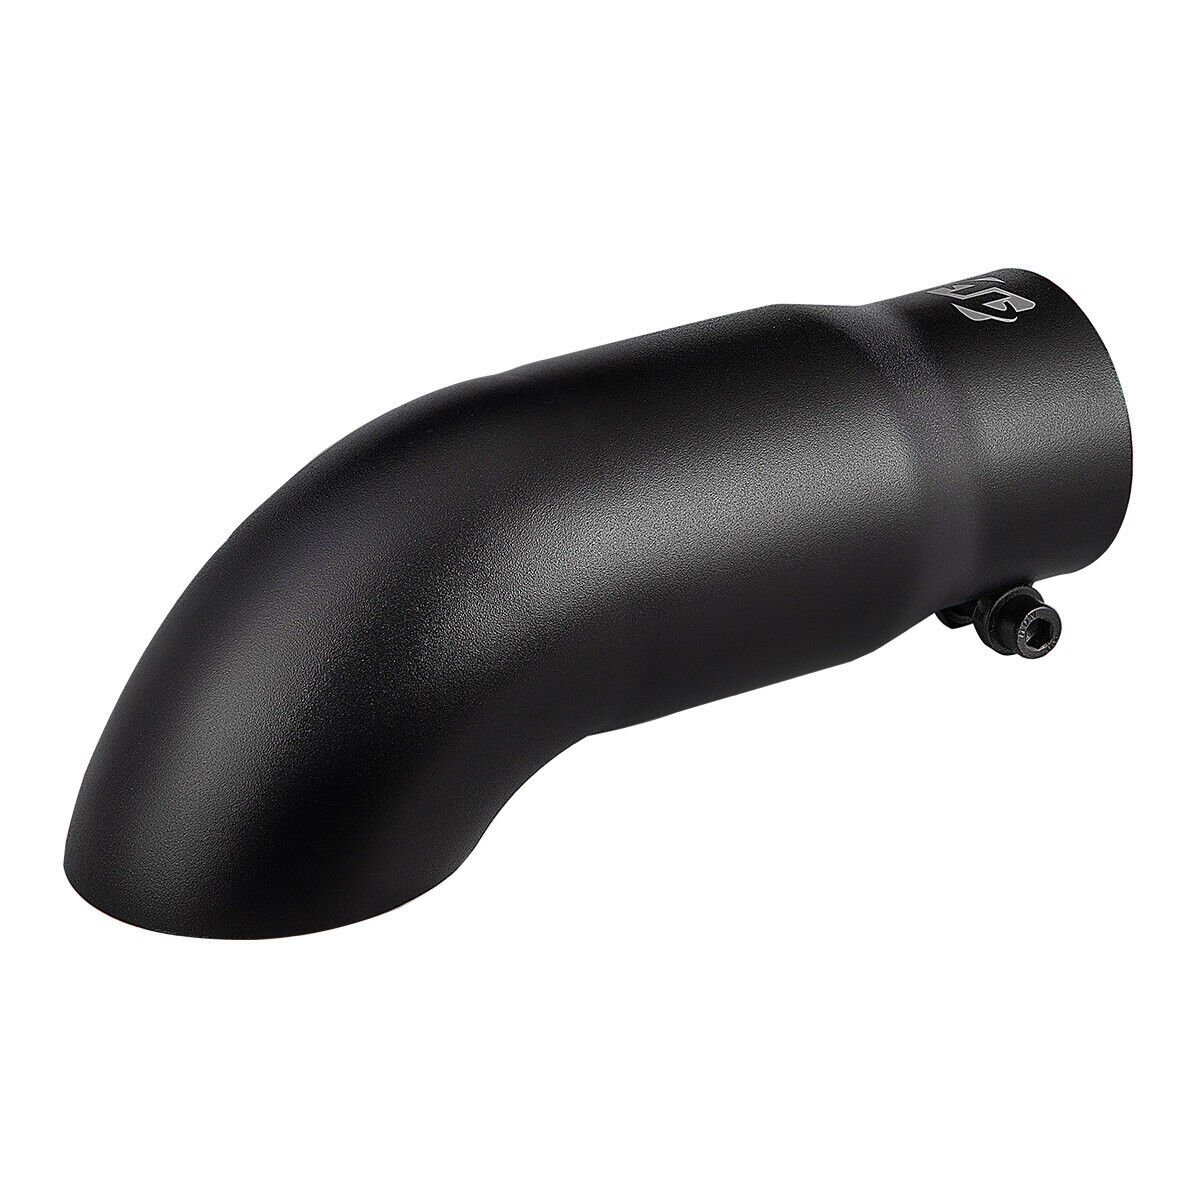 Exhaust tip 2.5'' Inlet Black Coated Stainless Steel Turn Down 2.5ID x 3OD x 9L